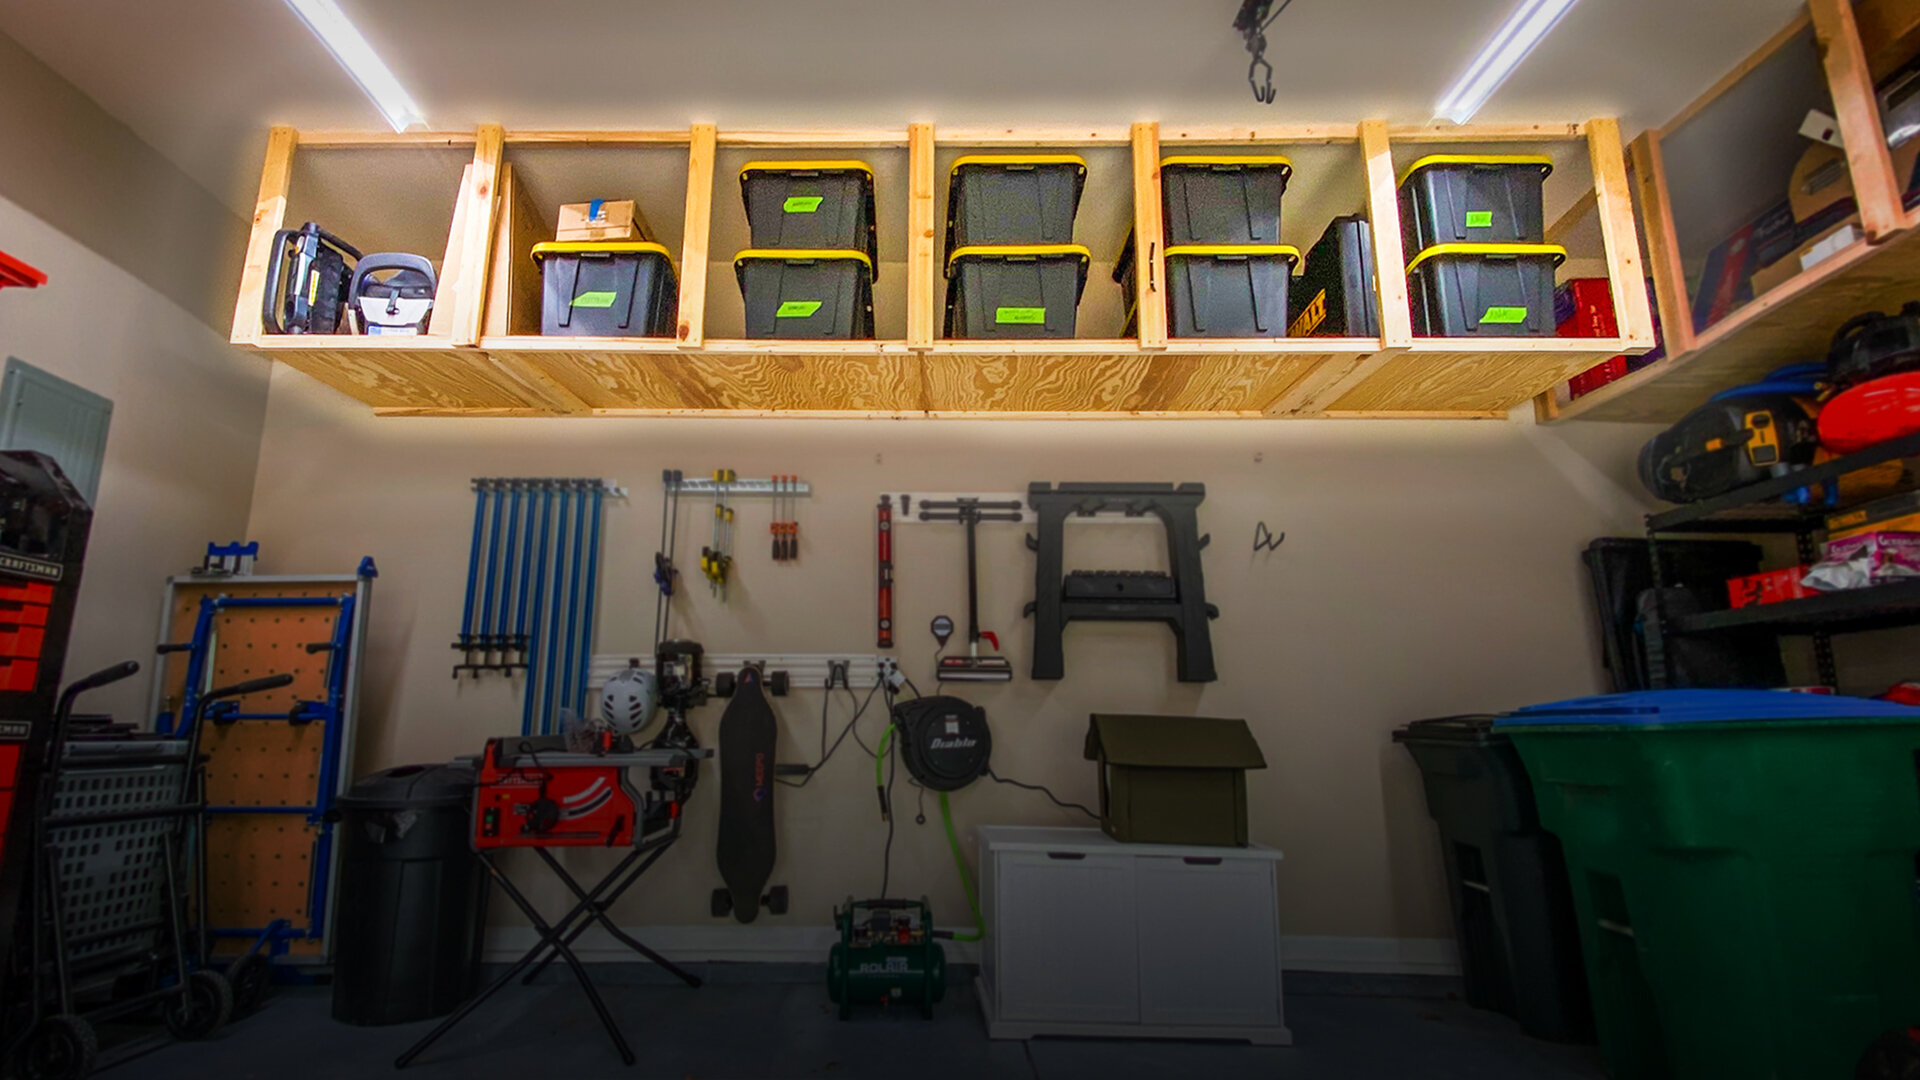 How To Build Diy Garage Storage Shelves, How To Build Shelves In Your Garage